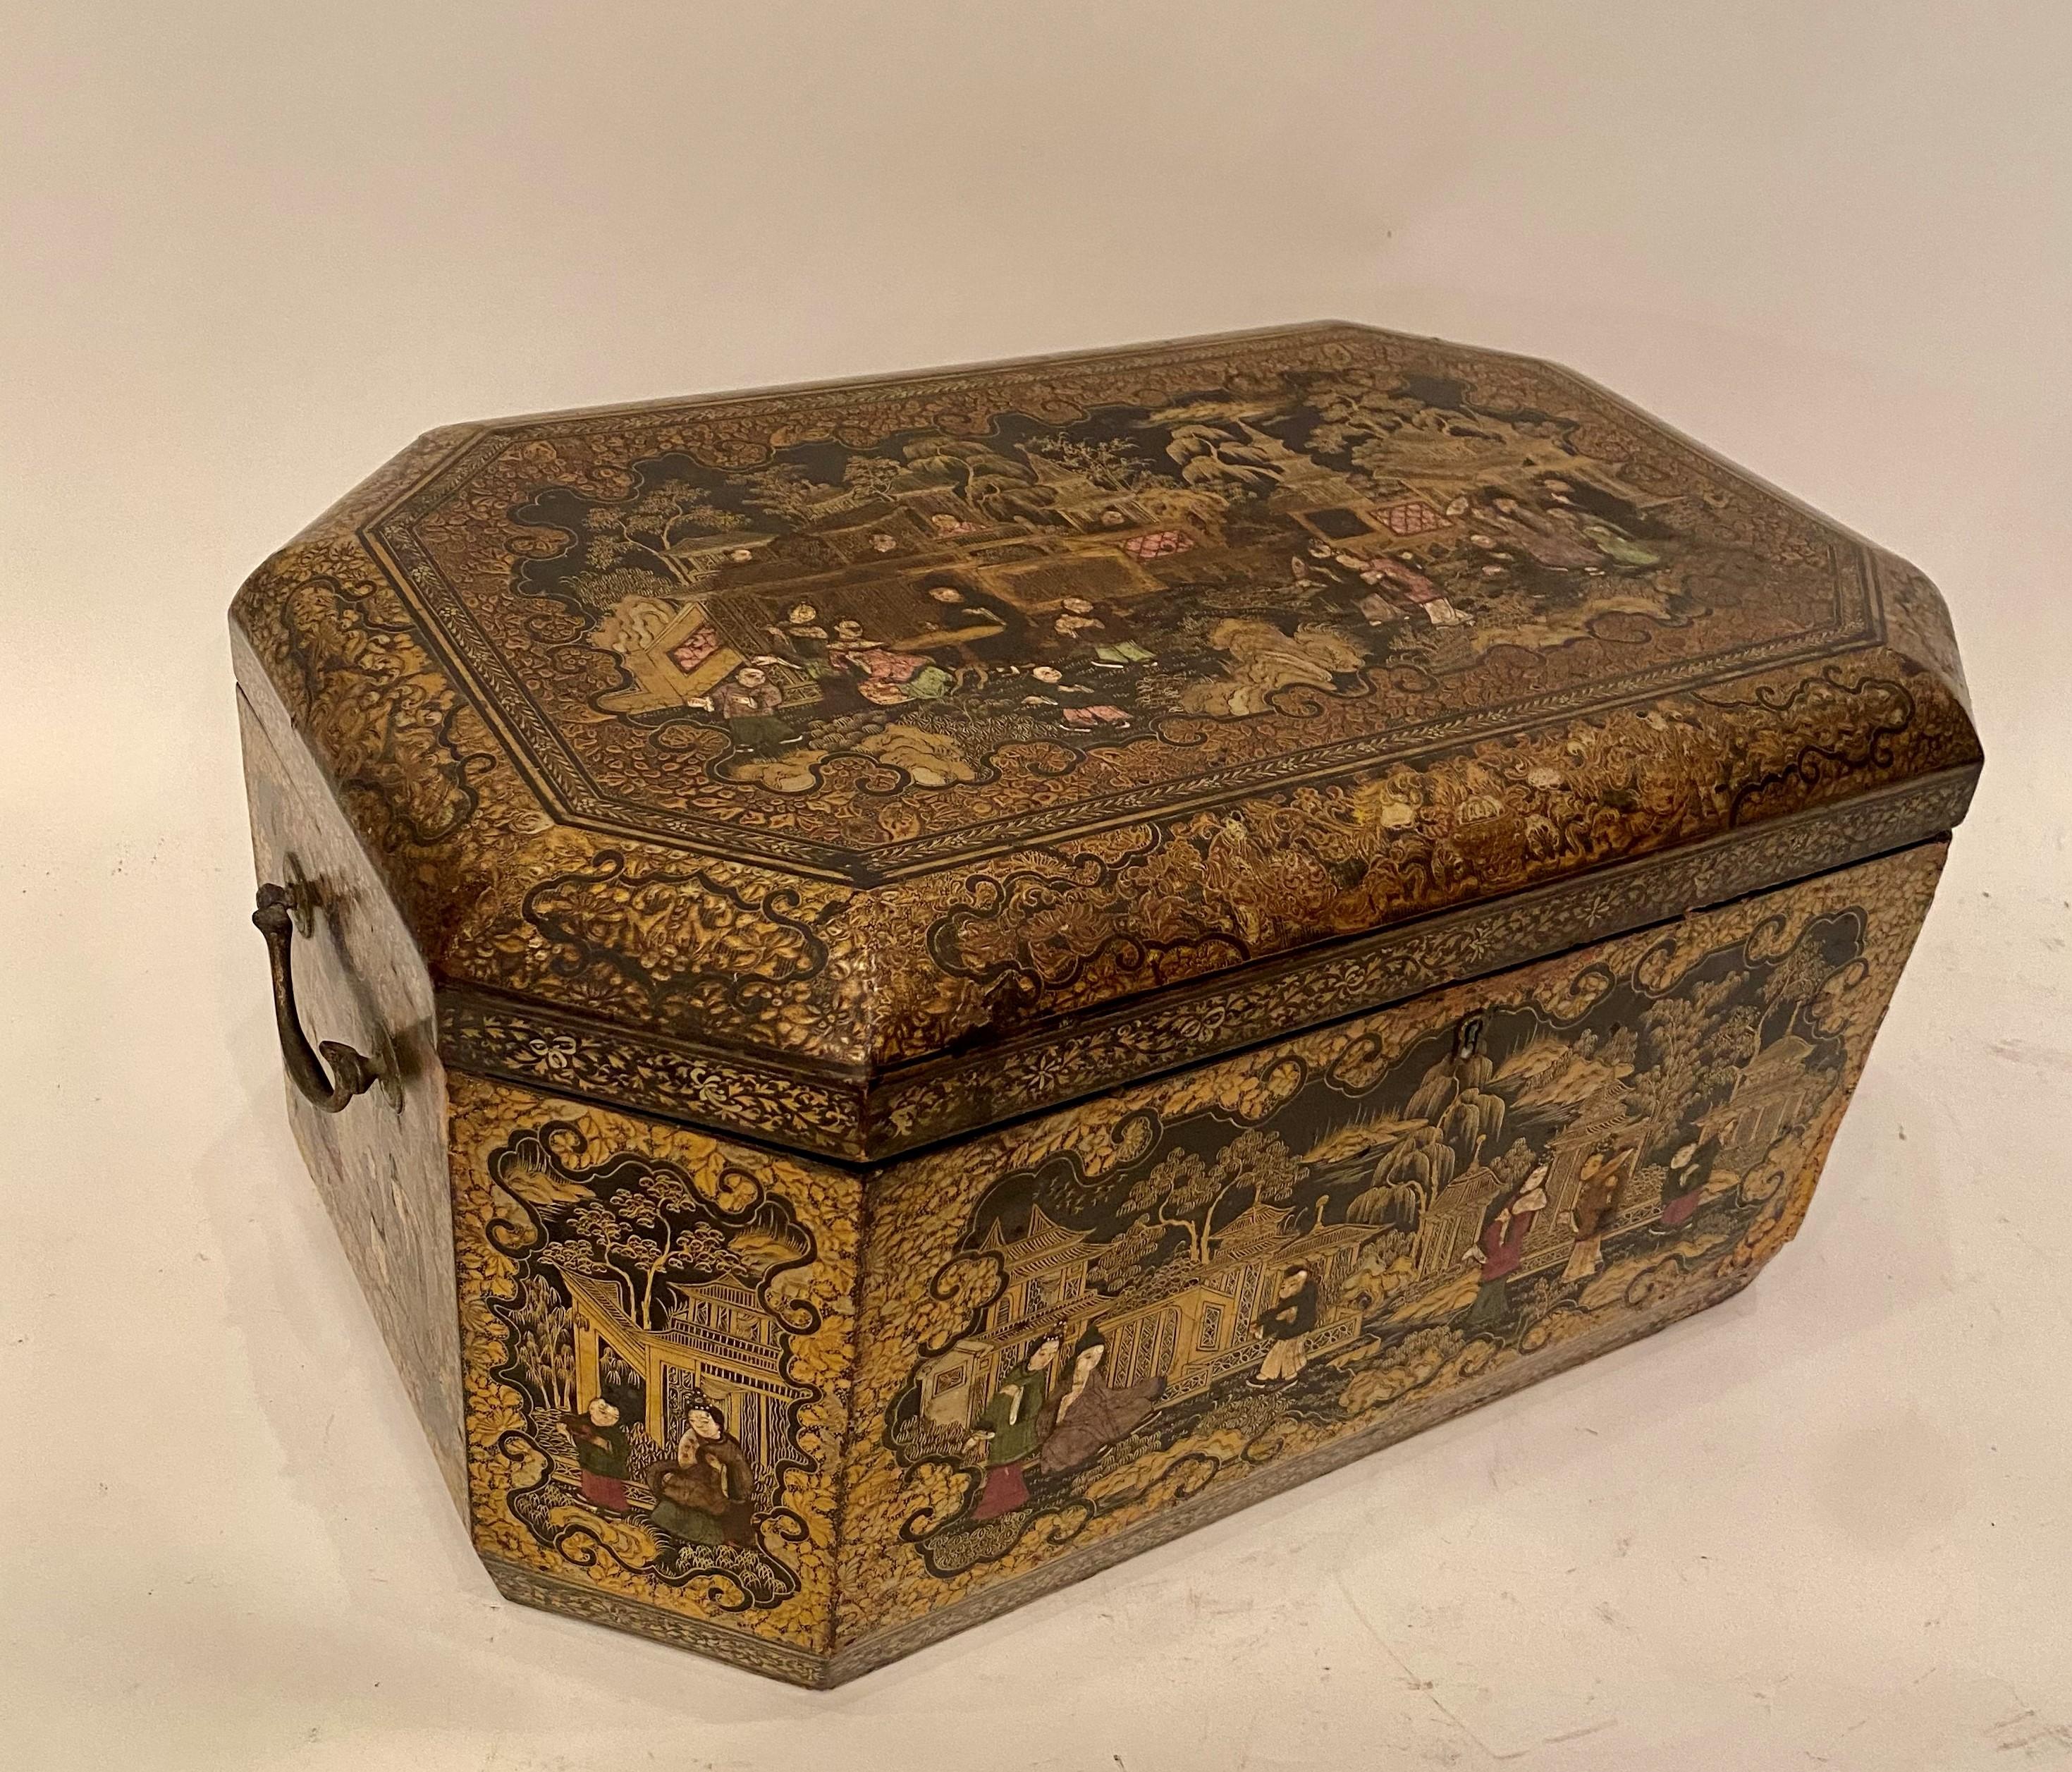 19th century large lift-lid gilt-decorated golden black lacquer Chinese table book box, crazing to lacquer overall, general marks nicks scratches, rubbing and wear overall. Very larger beautiful box. Measures: 18.5 inch width x 12.5 inch depth x 9.5